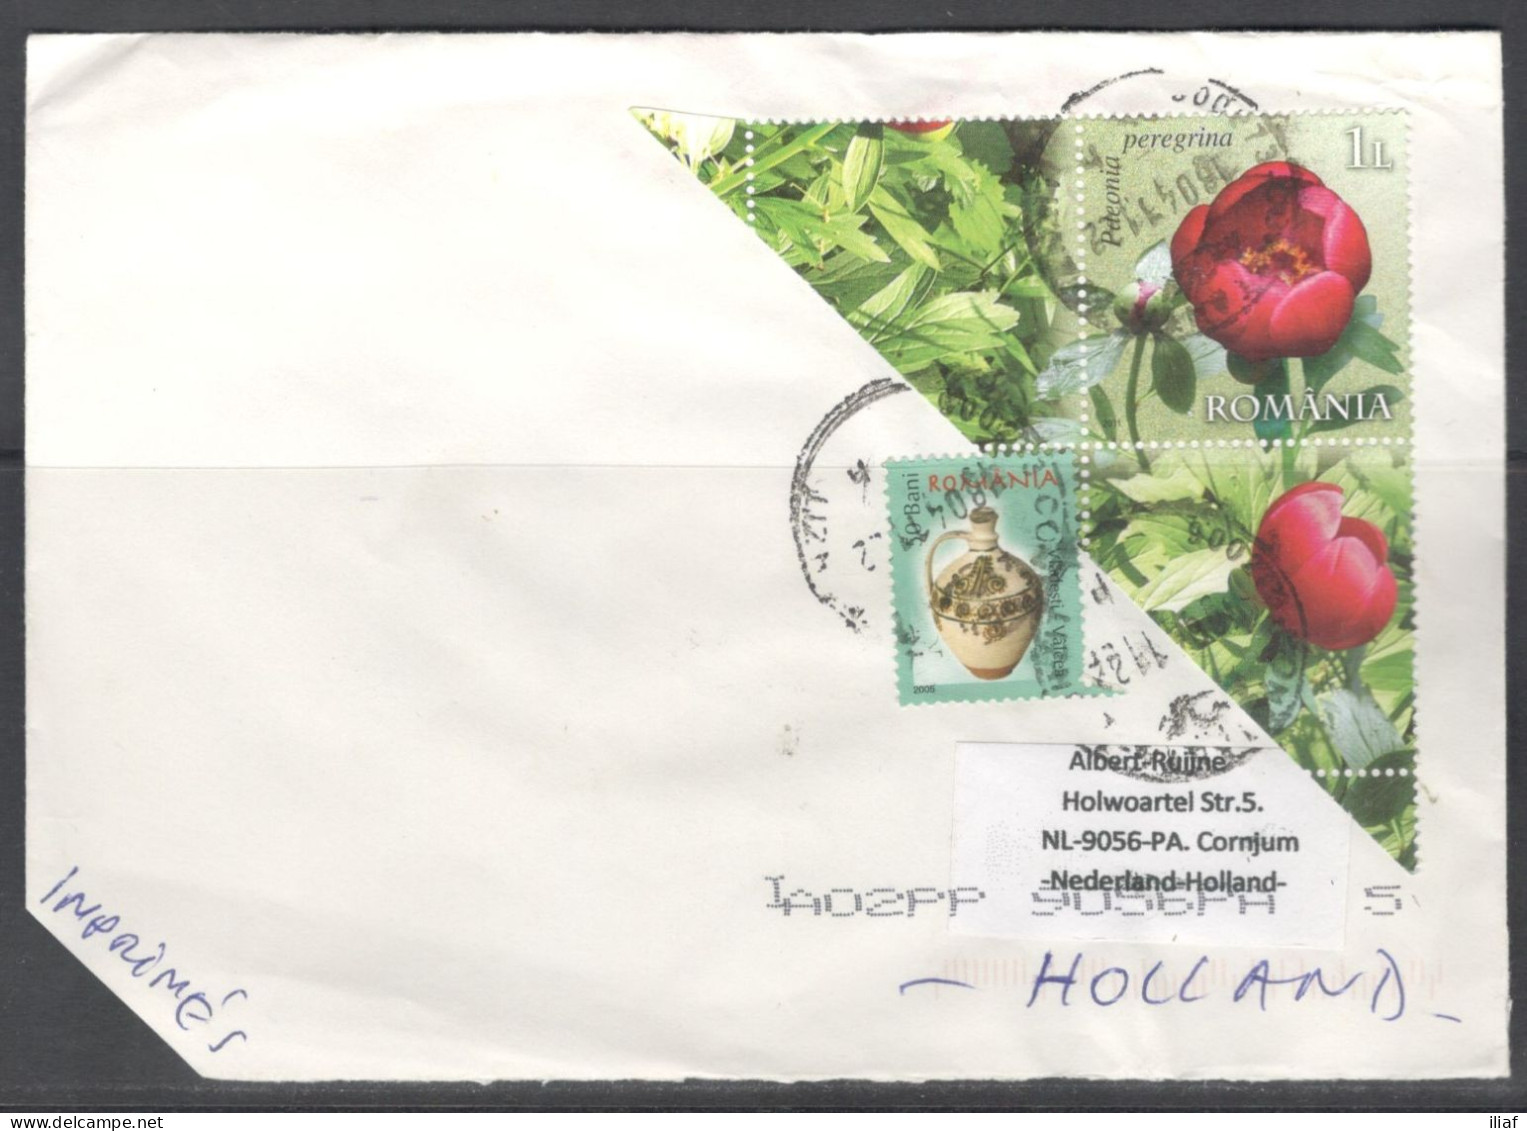 Romania. Stamps Mi. 6507, 6007 On Letter, Sent From Constanta On 18.04.2011 To Nederland. - Covers & Documents